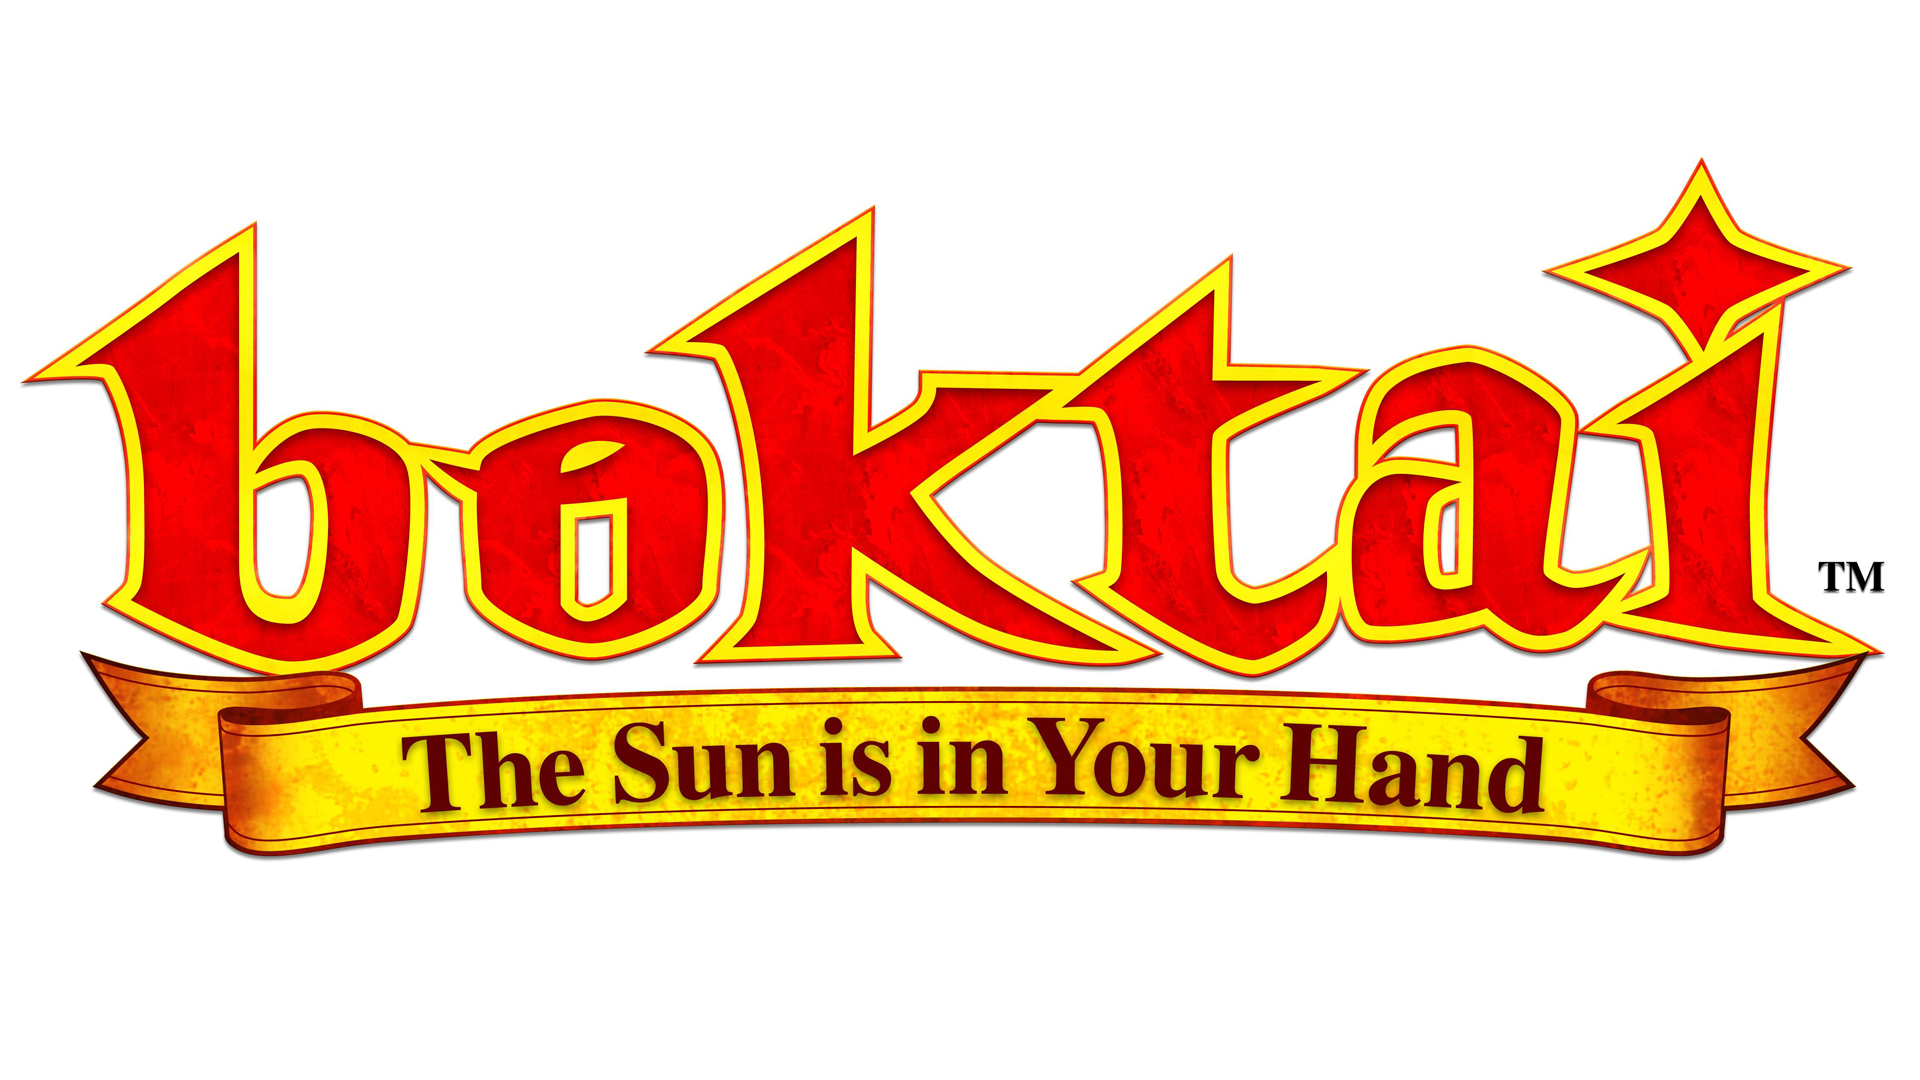 Boktai: The Sun is in Your Hand Logo